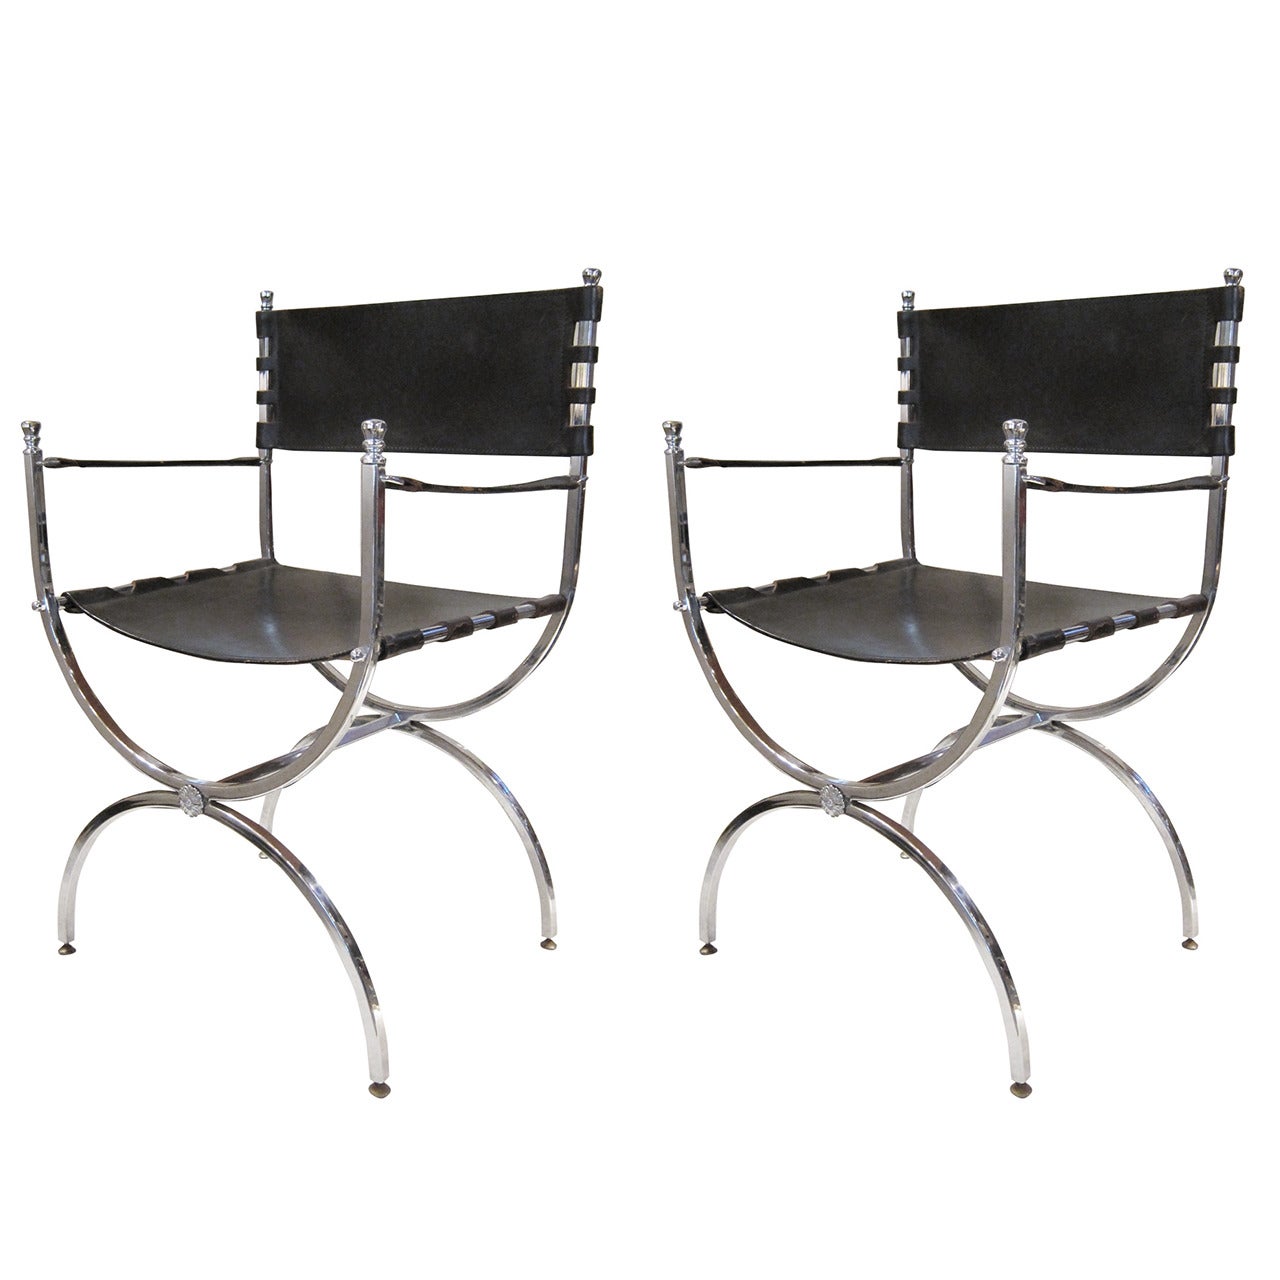 Maison Ramsey, Chromed Steel and Leather Pair of Chairs, France 1940 For Sale